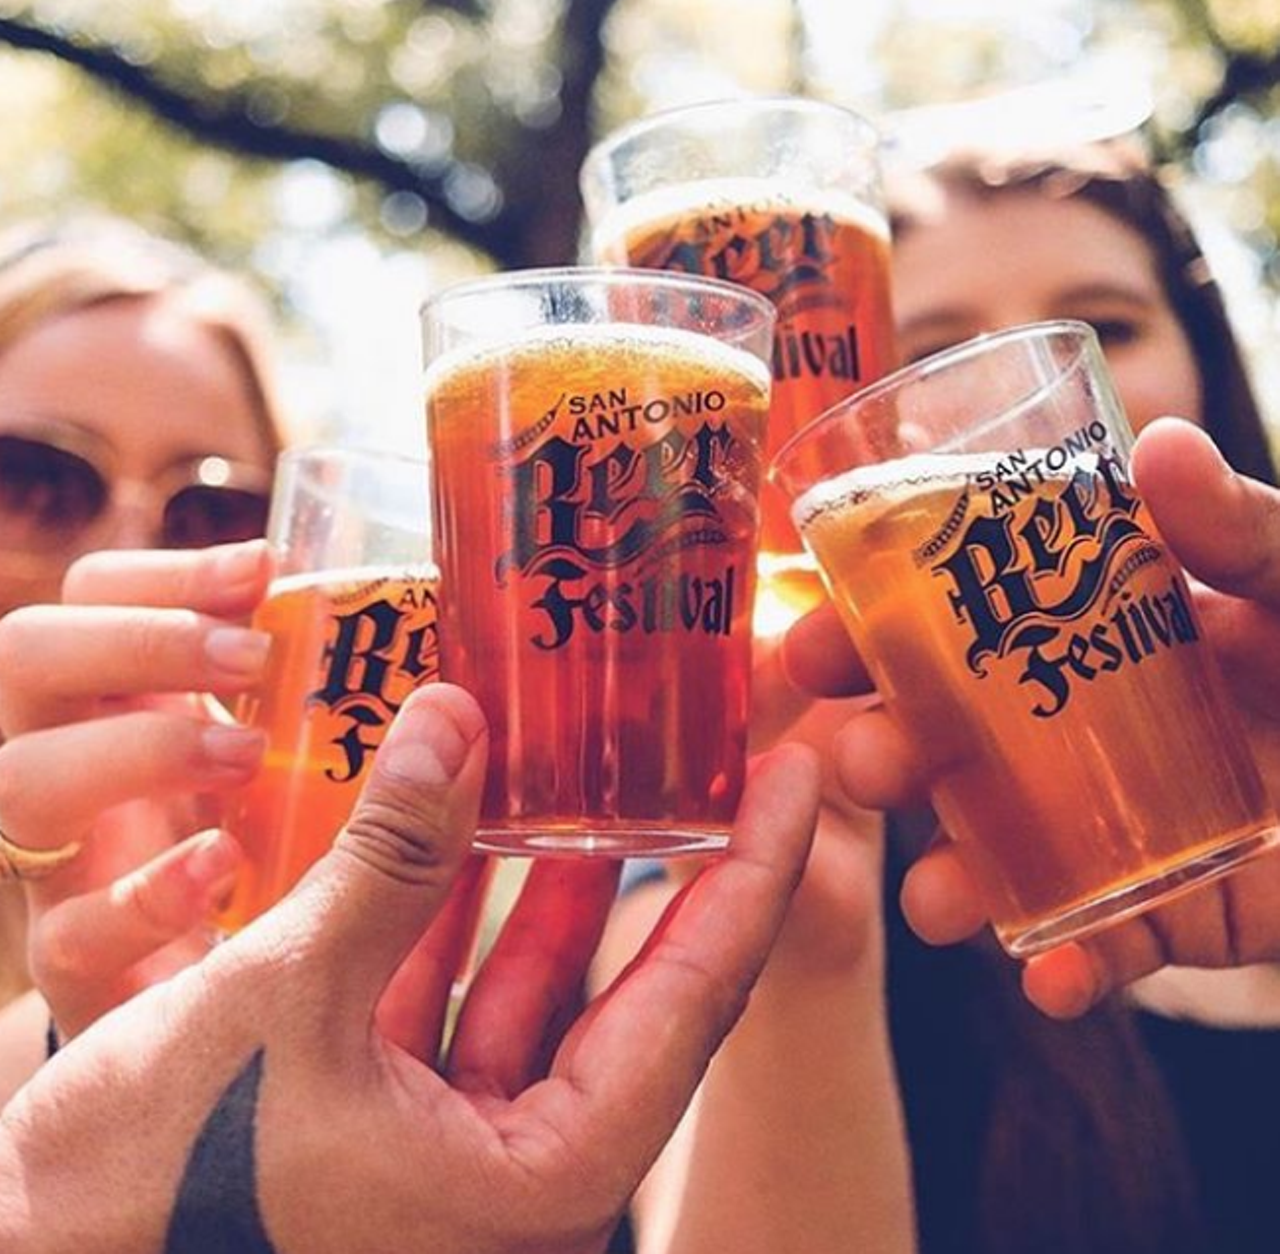 San Antonio Beer Festival
$45+, Saturday, Oct. 19, 1:30pm, Dignowity Park, 701 Nolan St, sanantoniobeerfestival.com
Back for a 13th year, the annual San Antonio Beer Festival lets you have an entire day of beer-guzzling. Walk around the grounds and take your pick from more than 400 premium and craft beers from more than 125 breweries around the world! The event is ideal for both casual beer drinkers and craft snobs alike.
Photo via Instagram / sacurrent